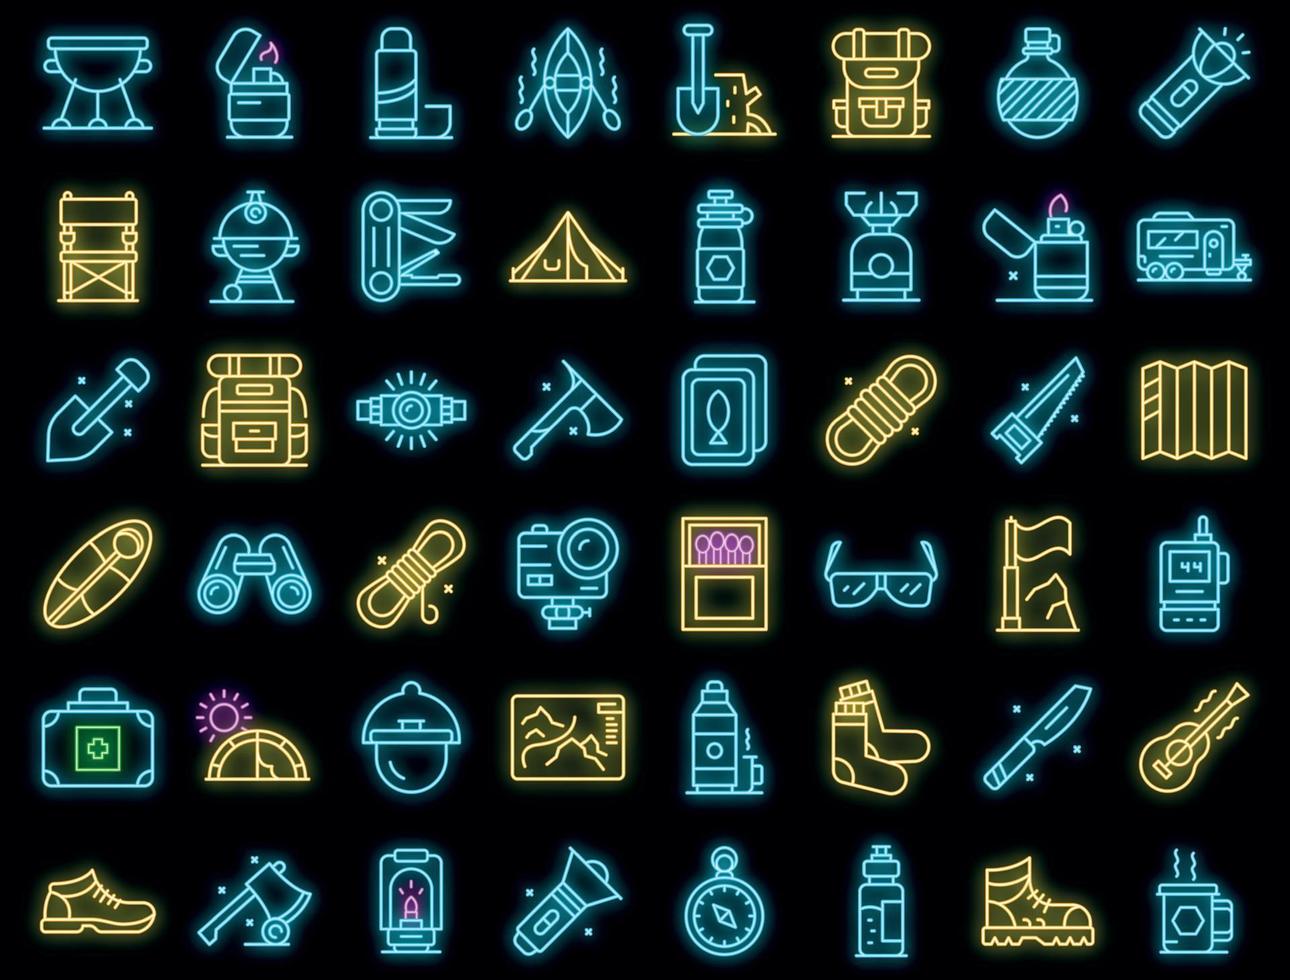 Equipment for hike icons set vector neon